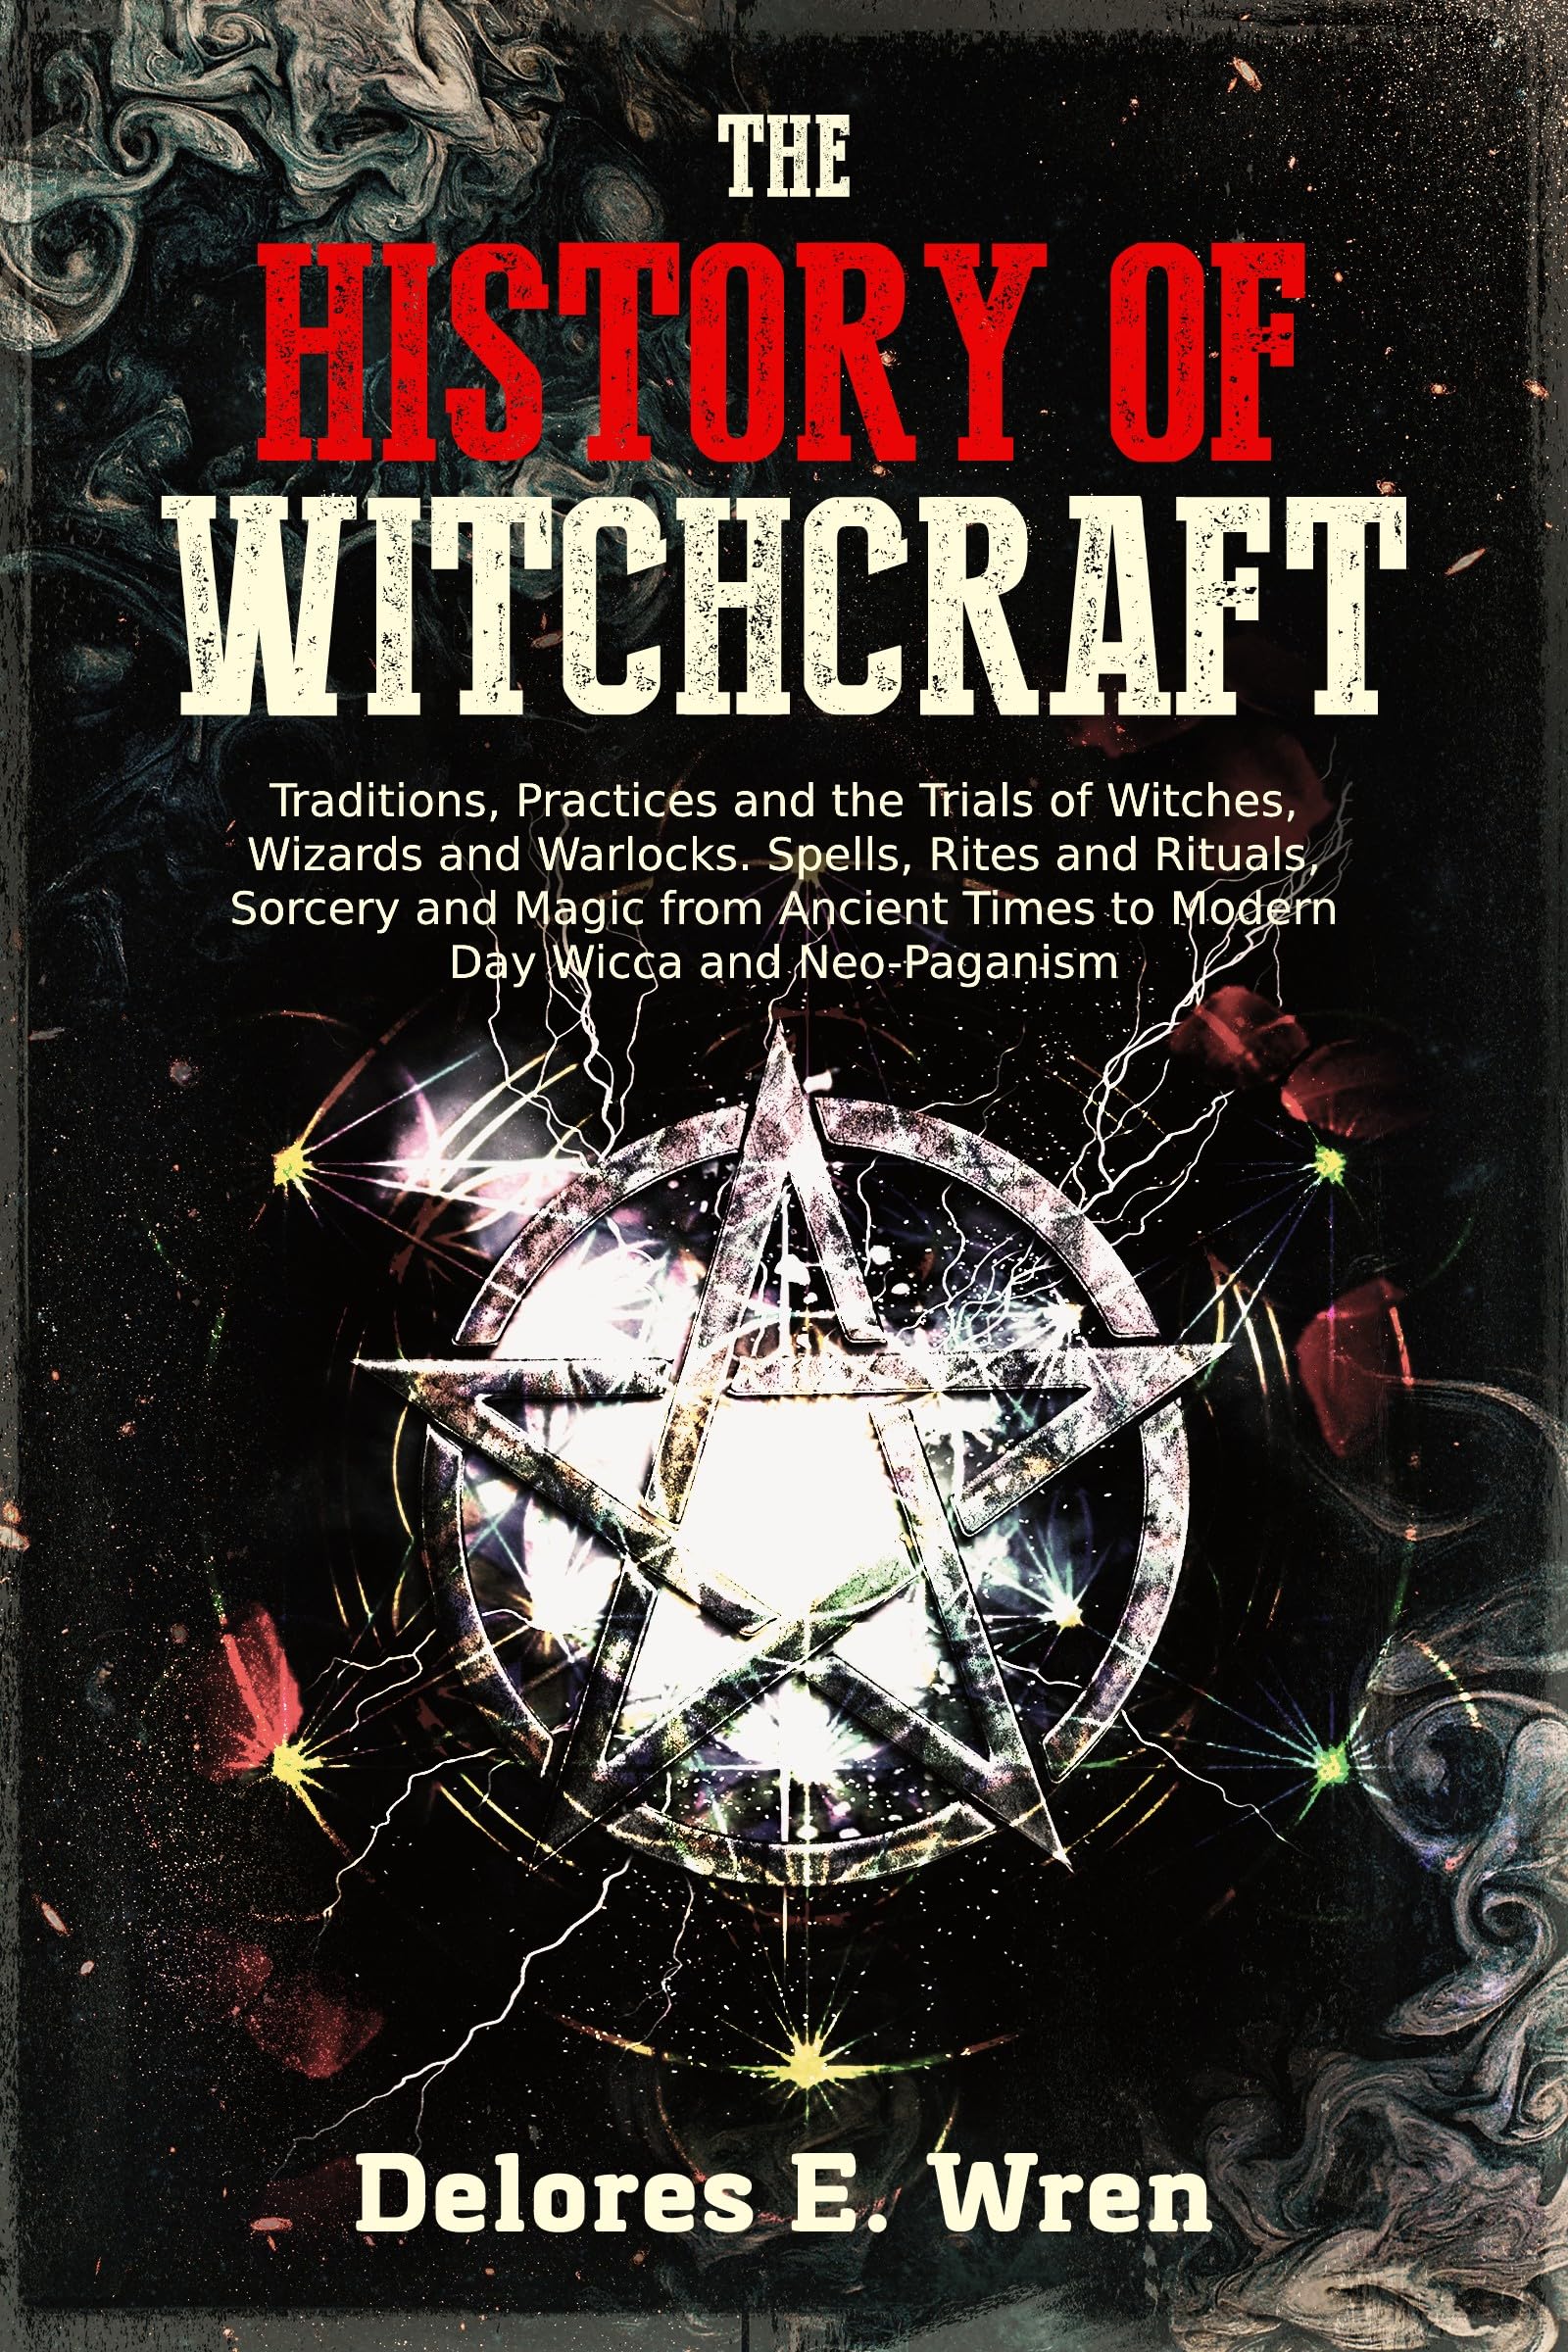 The History of Witchcraft: Traditions, Practices and the Trials of Witches, Wizards and Warlocks. Spells, Rites and Rituals, Sorcery and Magic from Ancient Times to Modern Day Wicca and Neo-Paganism